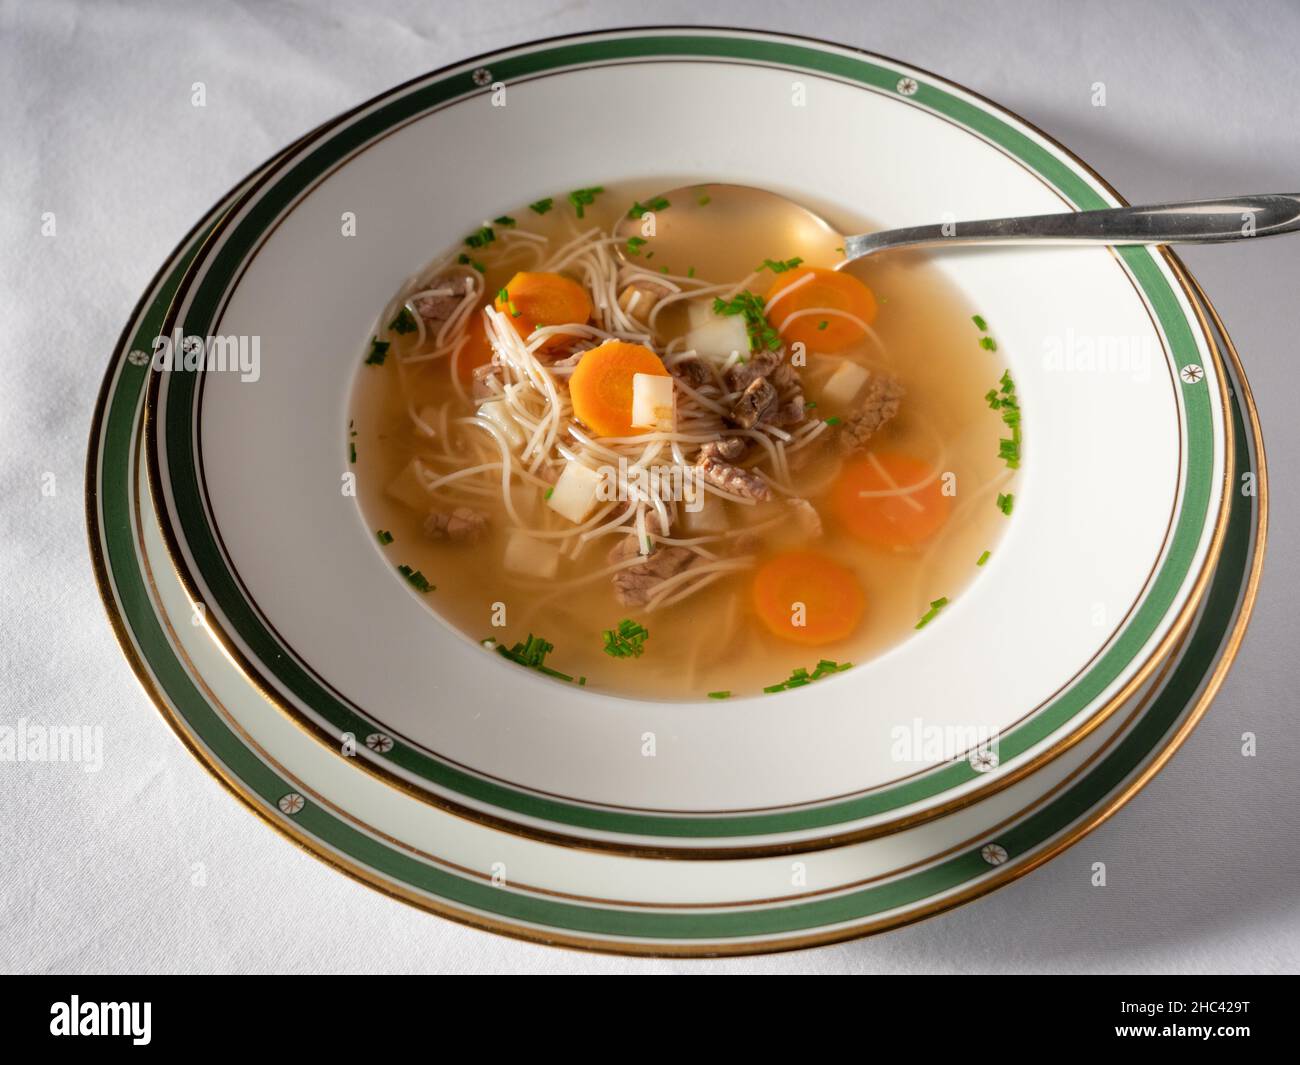 https://c8.alamy.com/comp/2HC429T/altwiener-suppentopf-or-old-vienna-style-soup-pot-with-boiled-beef-noodles-and-carrots-2HC429T.jpg